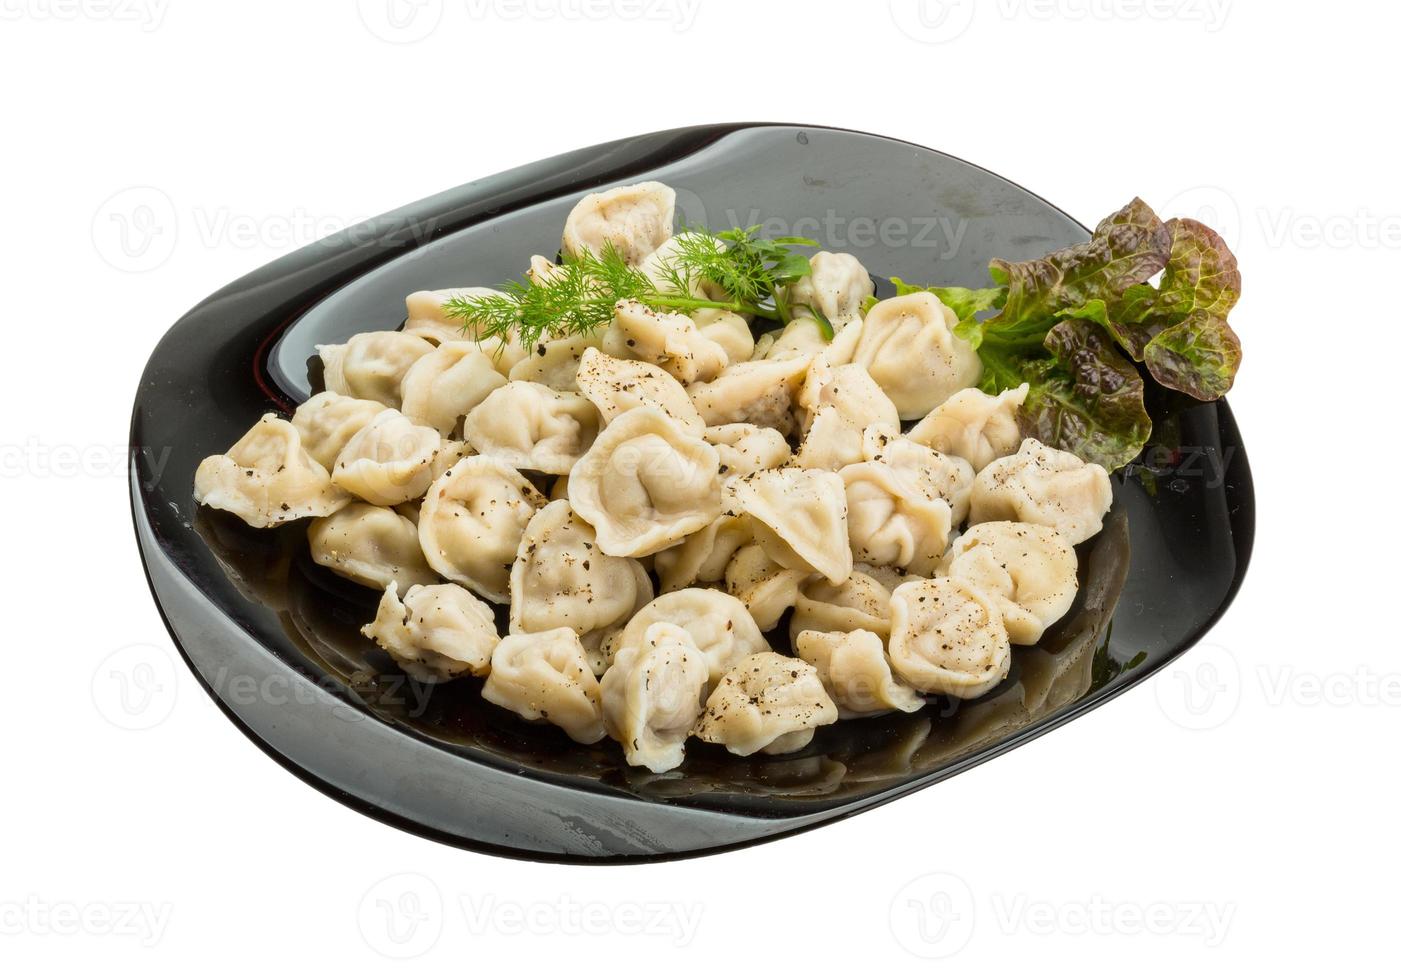 Russian dumplings on the plate and white background photo